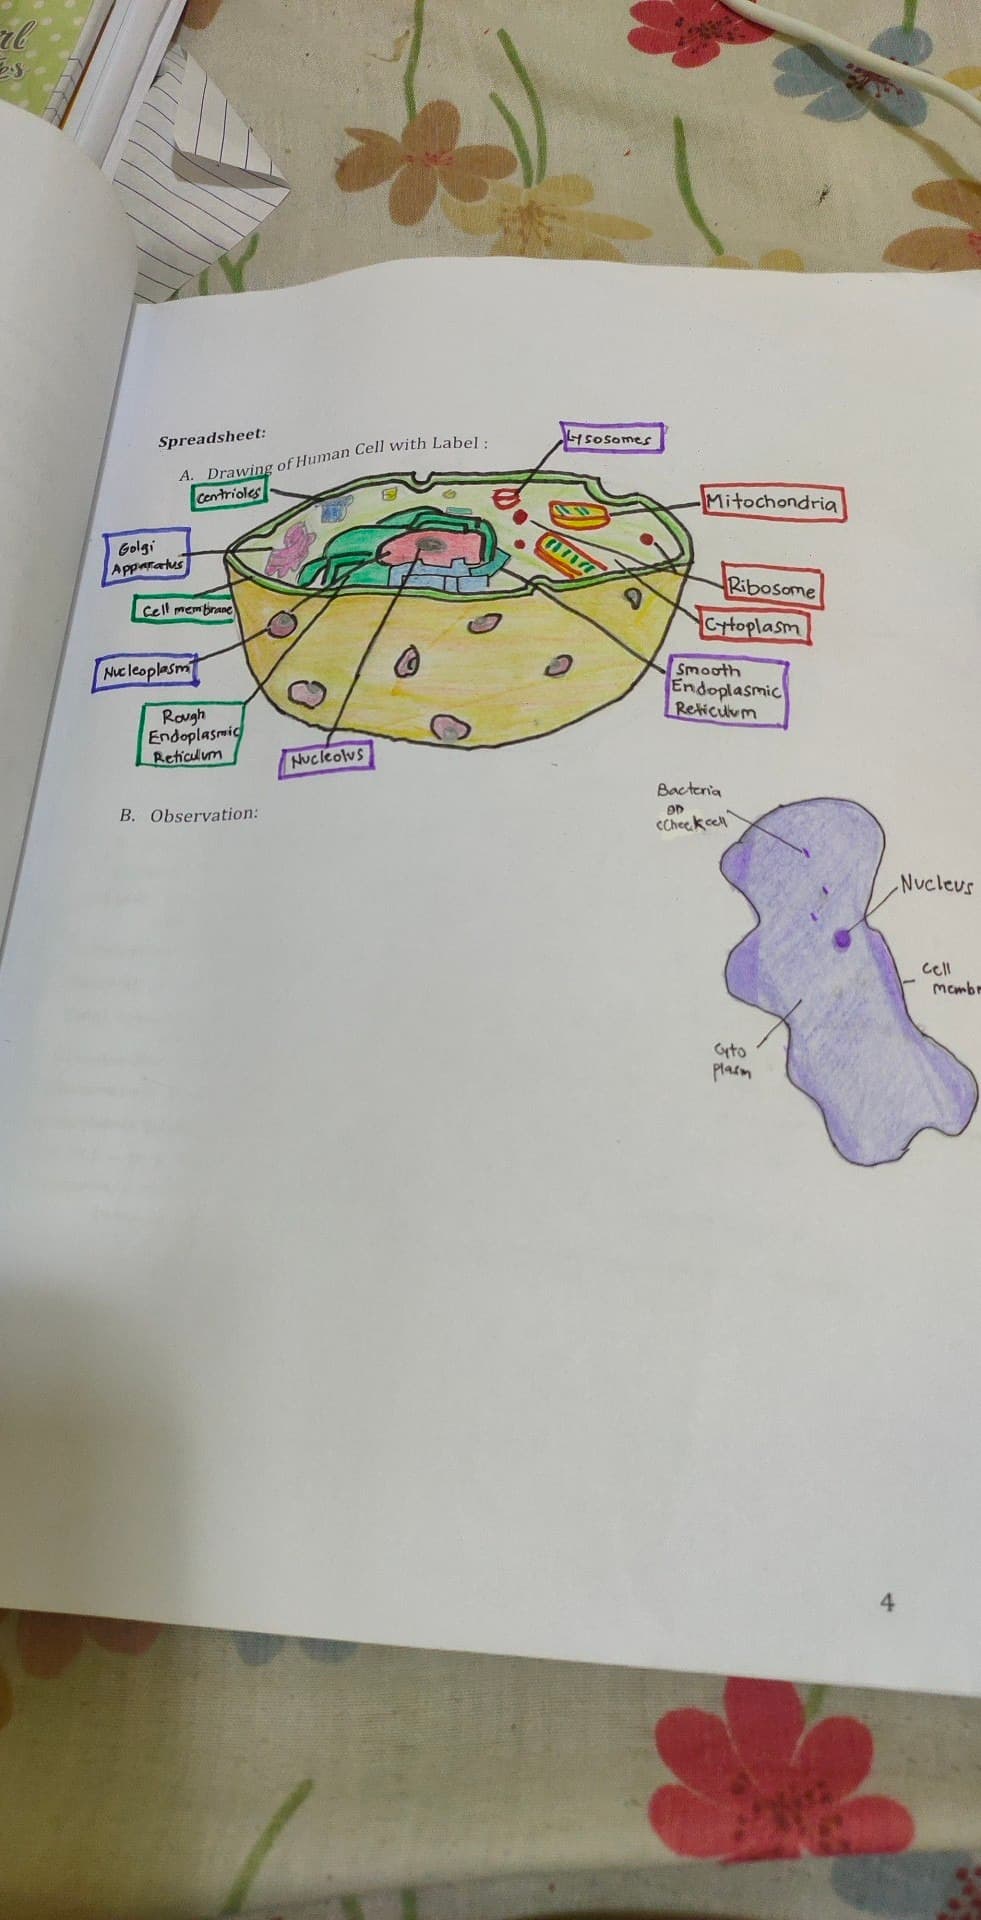 il
Spreadsheet:
A.
Golgi
Apparatus
Drawing of Human Cell with Label:
Centrioles
Cell membrane
Nucleoplasm
Rough
Endoplasmic
Reticulum
B. Observation:
E
Nucleolus
8
Lysosomes
CHAYT
Mitochondria
Ribosome
Cytoplasm
Smooth
Endoplasmic
Reticulum
Bacteria
OD
cCheckcell
Cyto
plasm
Nucleus
Cell
membr